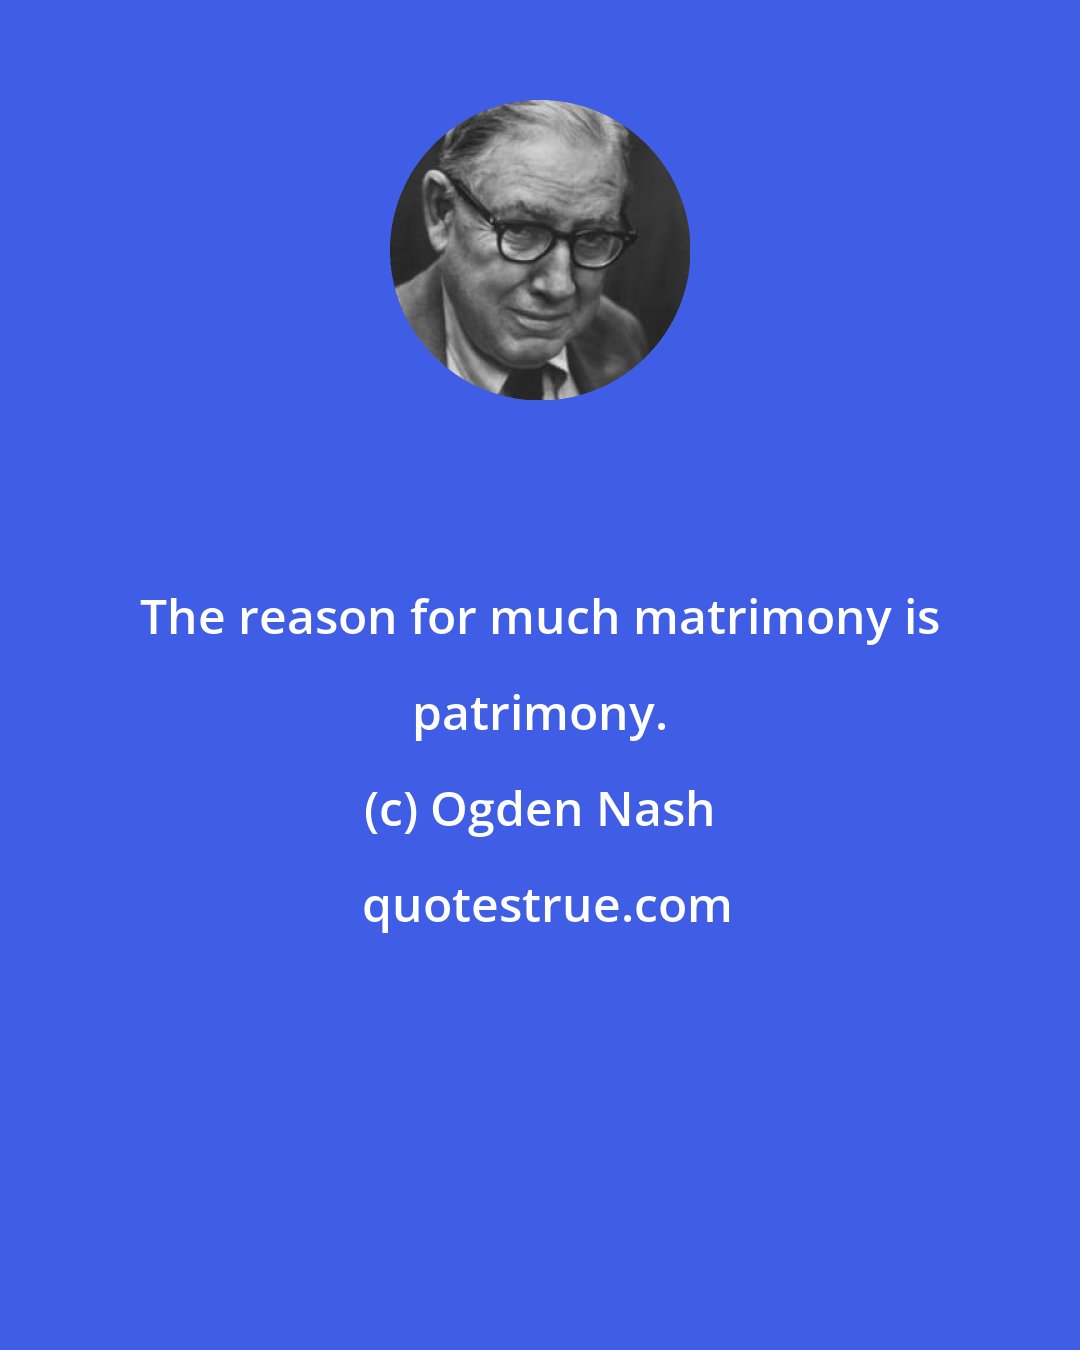 Ogden Nash: The reason for much matrimony is patrimony.